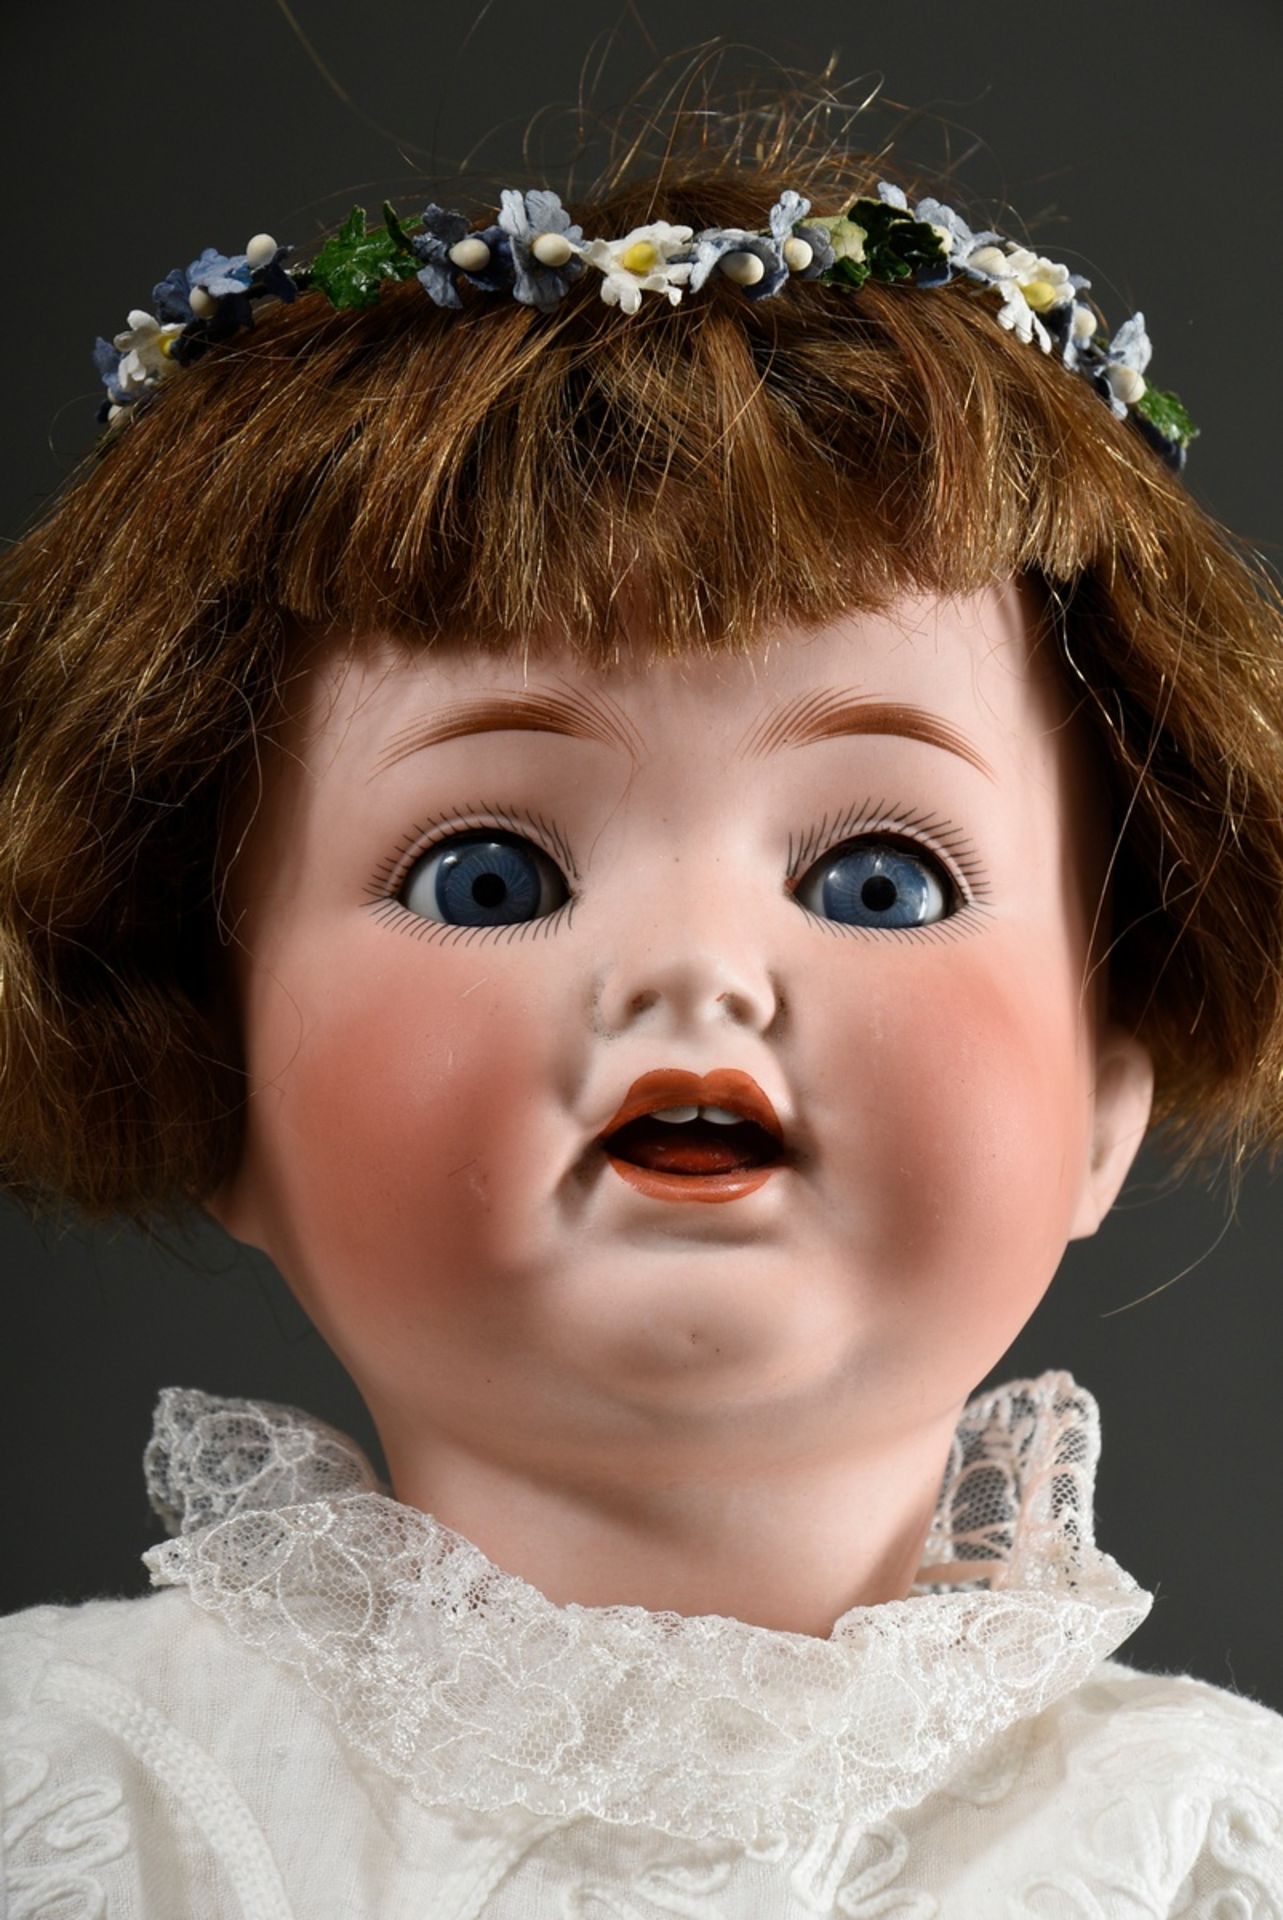 Ernst Heubach doll with bisque porcelain crank head, blue sleeping eyes, painted eyelashes, open mo - Image 3 of 4